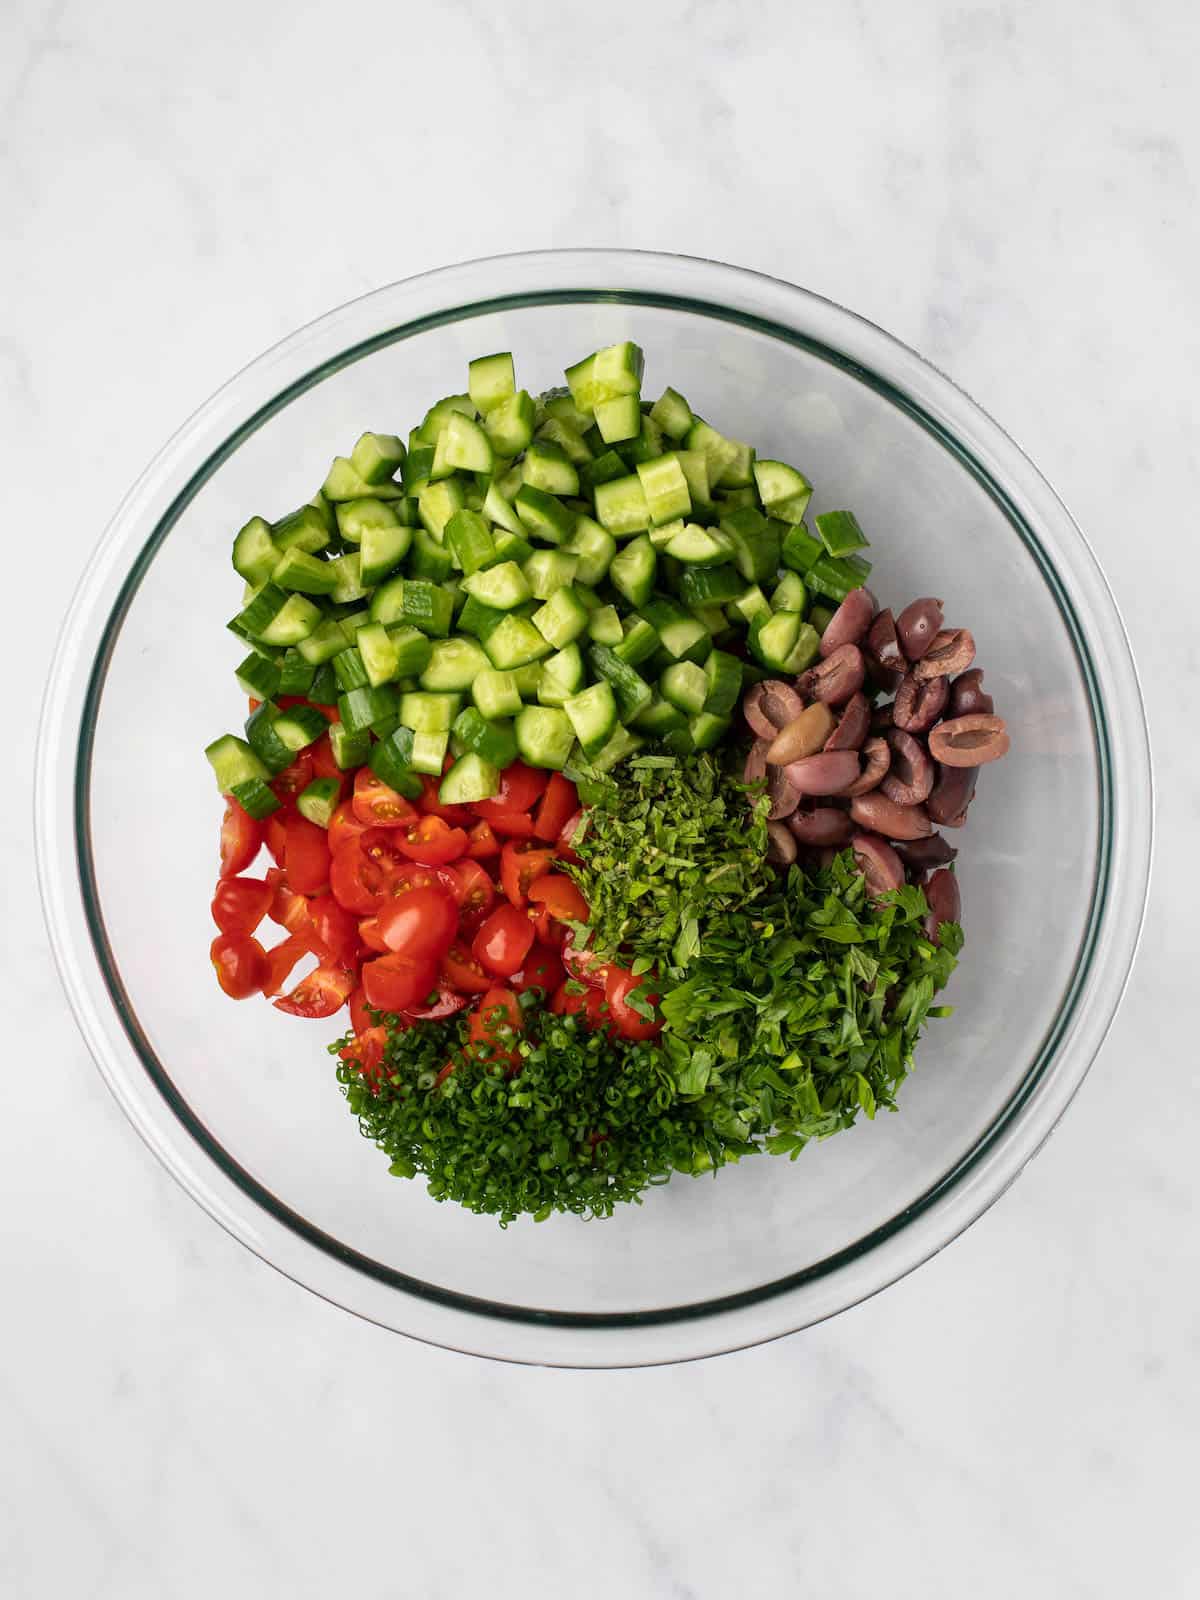 Chopped cucumber, tomato, olives, and fresh herbs in a bowl.